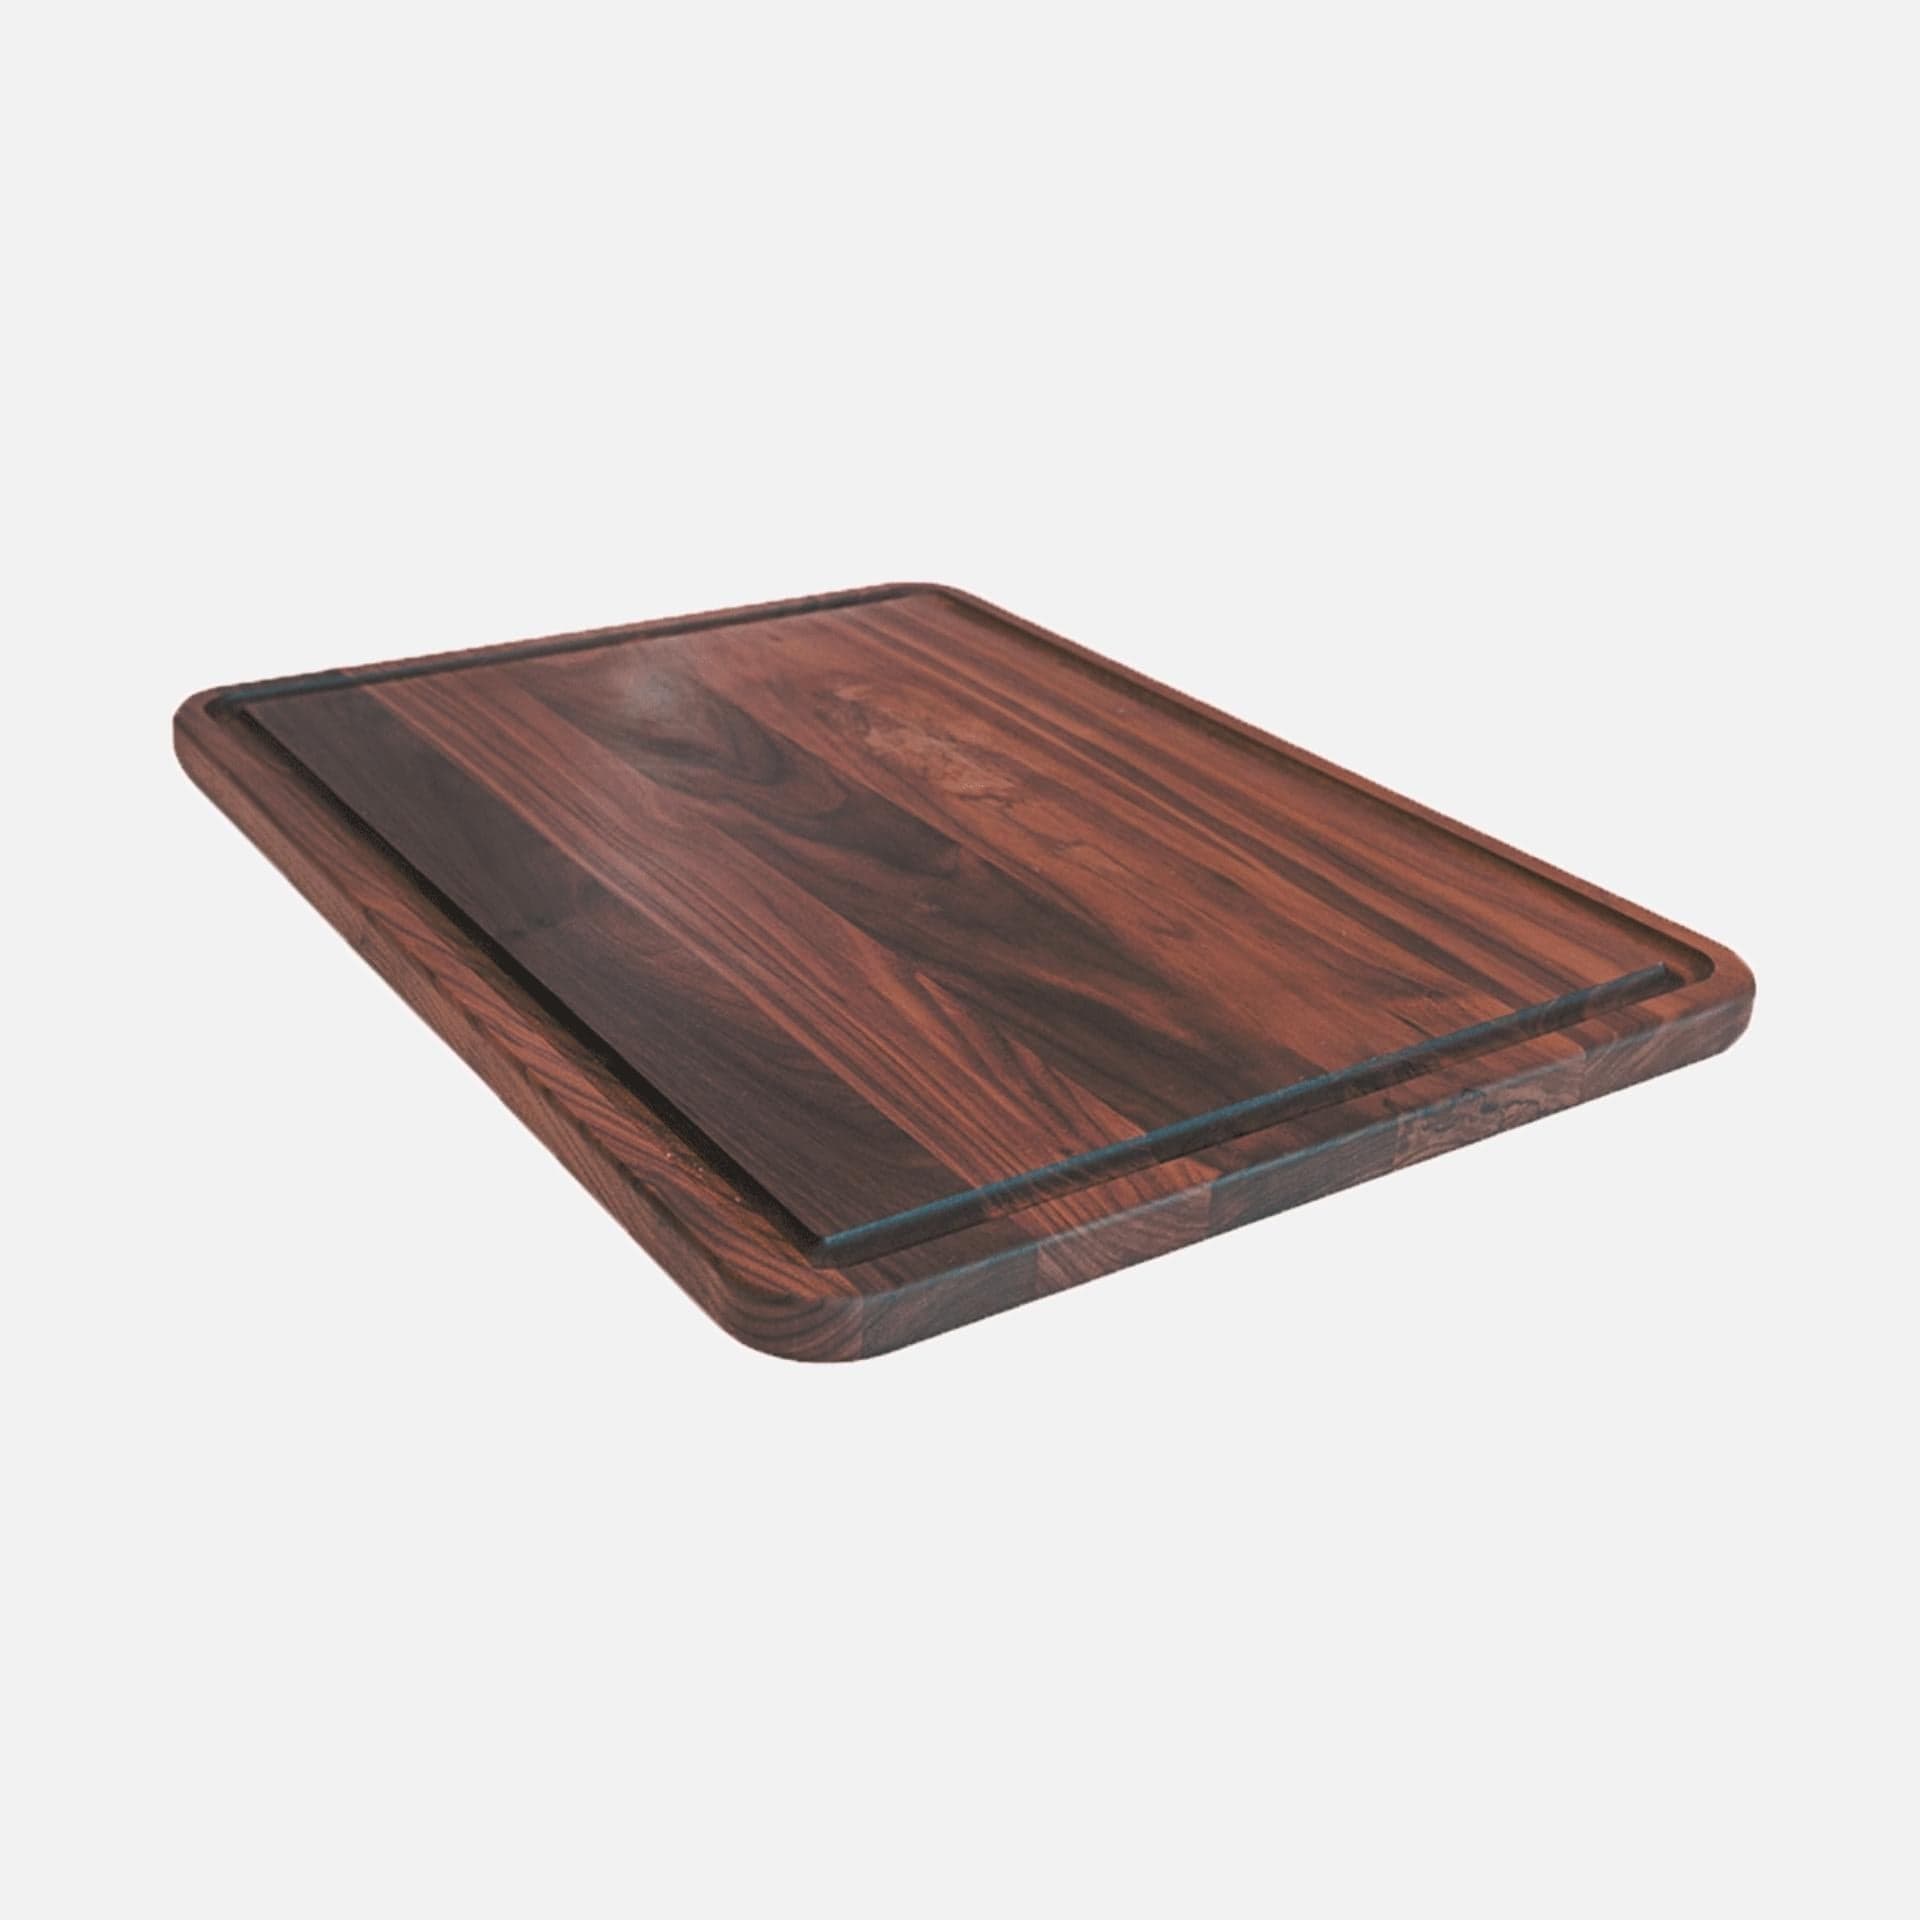 https://eyely.com/cdn/shop/products/virginia-boys-kitchens-20x15-in-large-walnut-cutting-board-with-juice-drip-groove-made-in-usa-large-15-x-20-walnut-board-reversible-with-juice-groove-cutting-board-made-in-usa-from-su.jpg?v=1668113781&width=1920